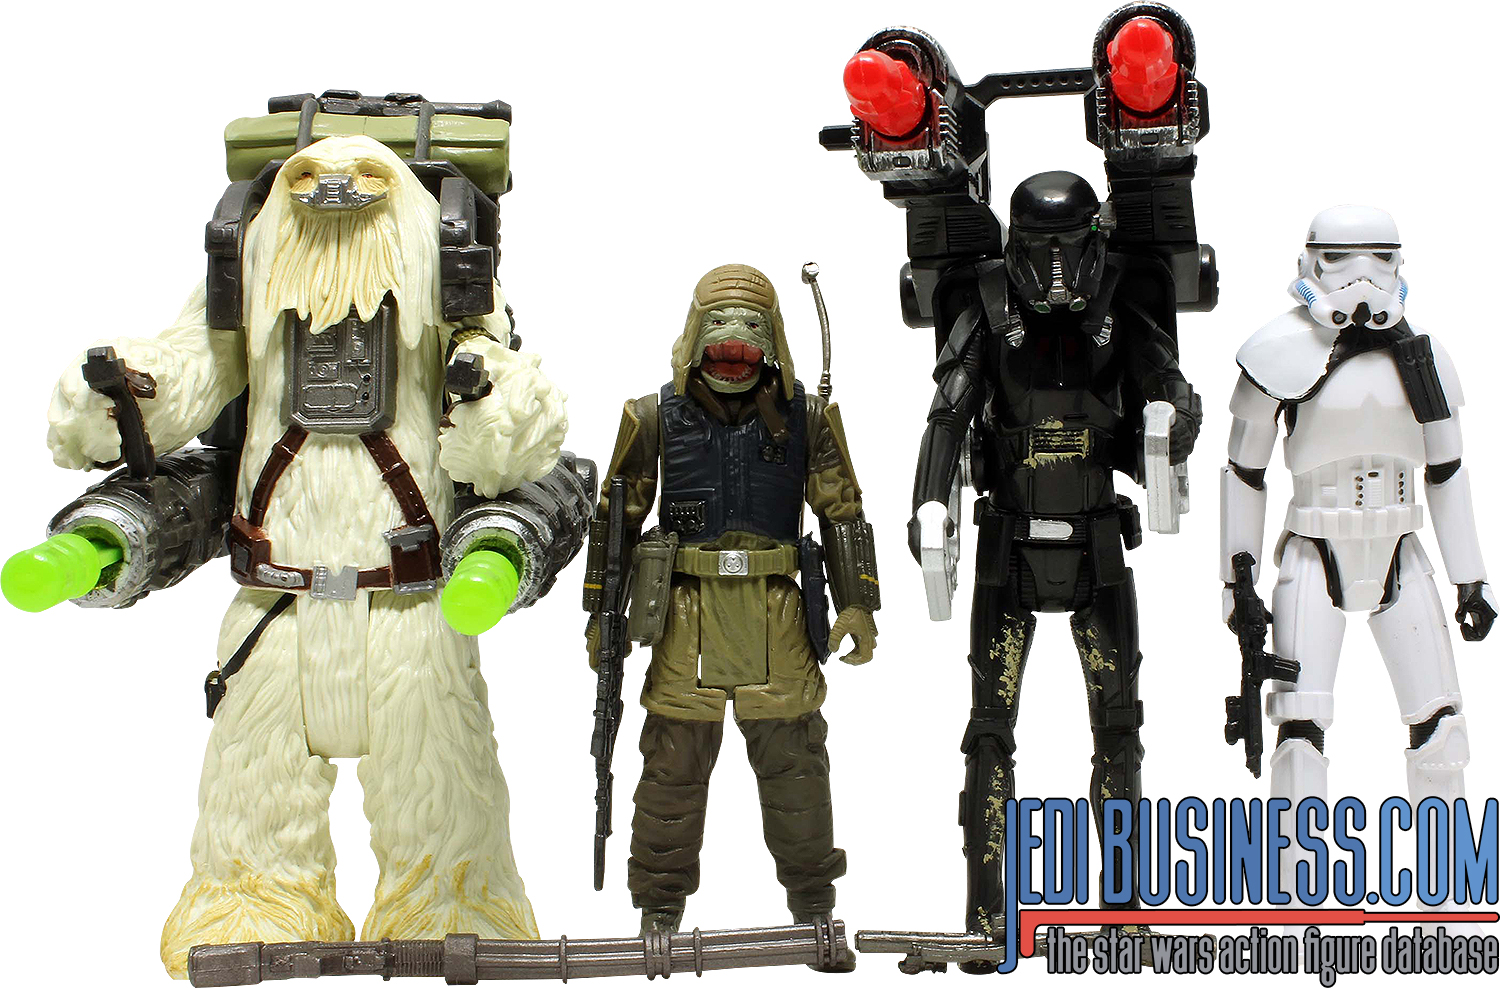 Death Trooper Kohl's Rogue One 4-Pack